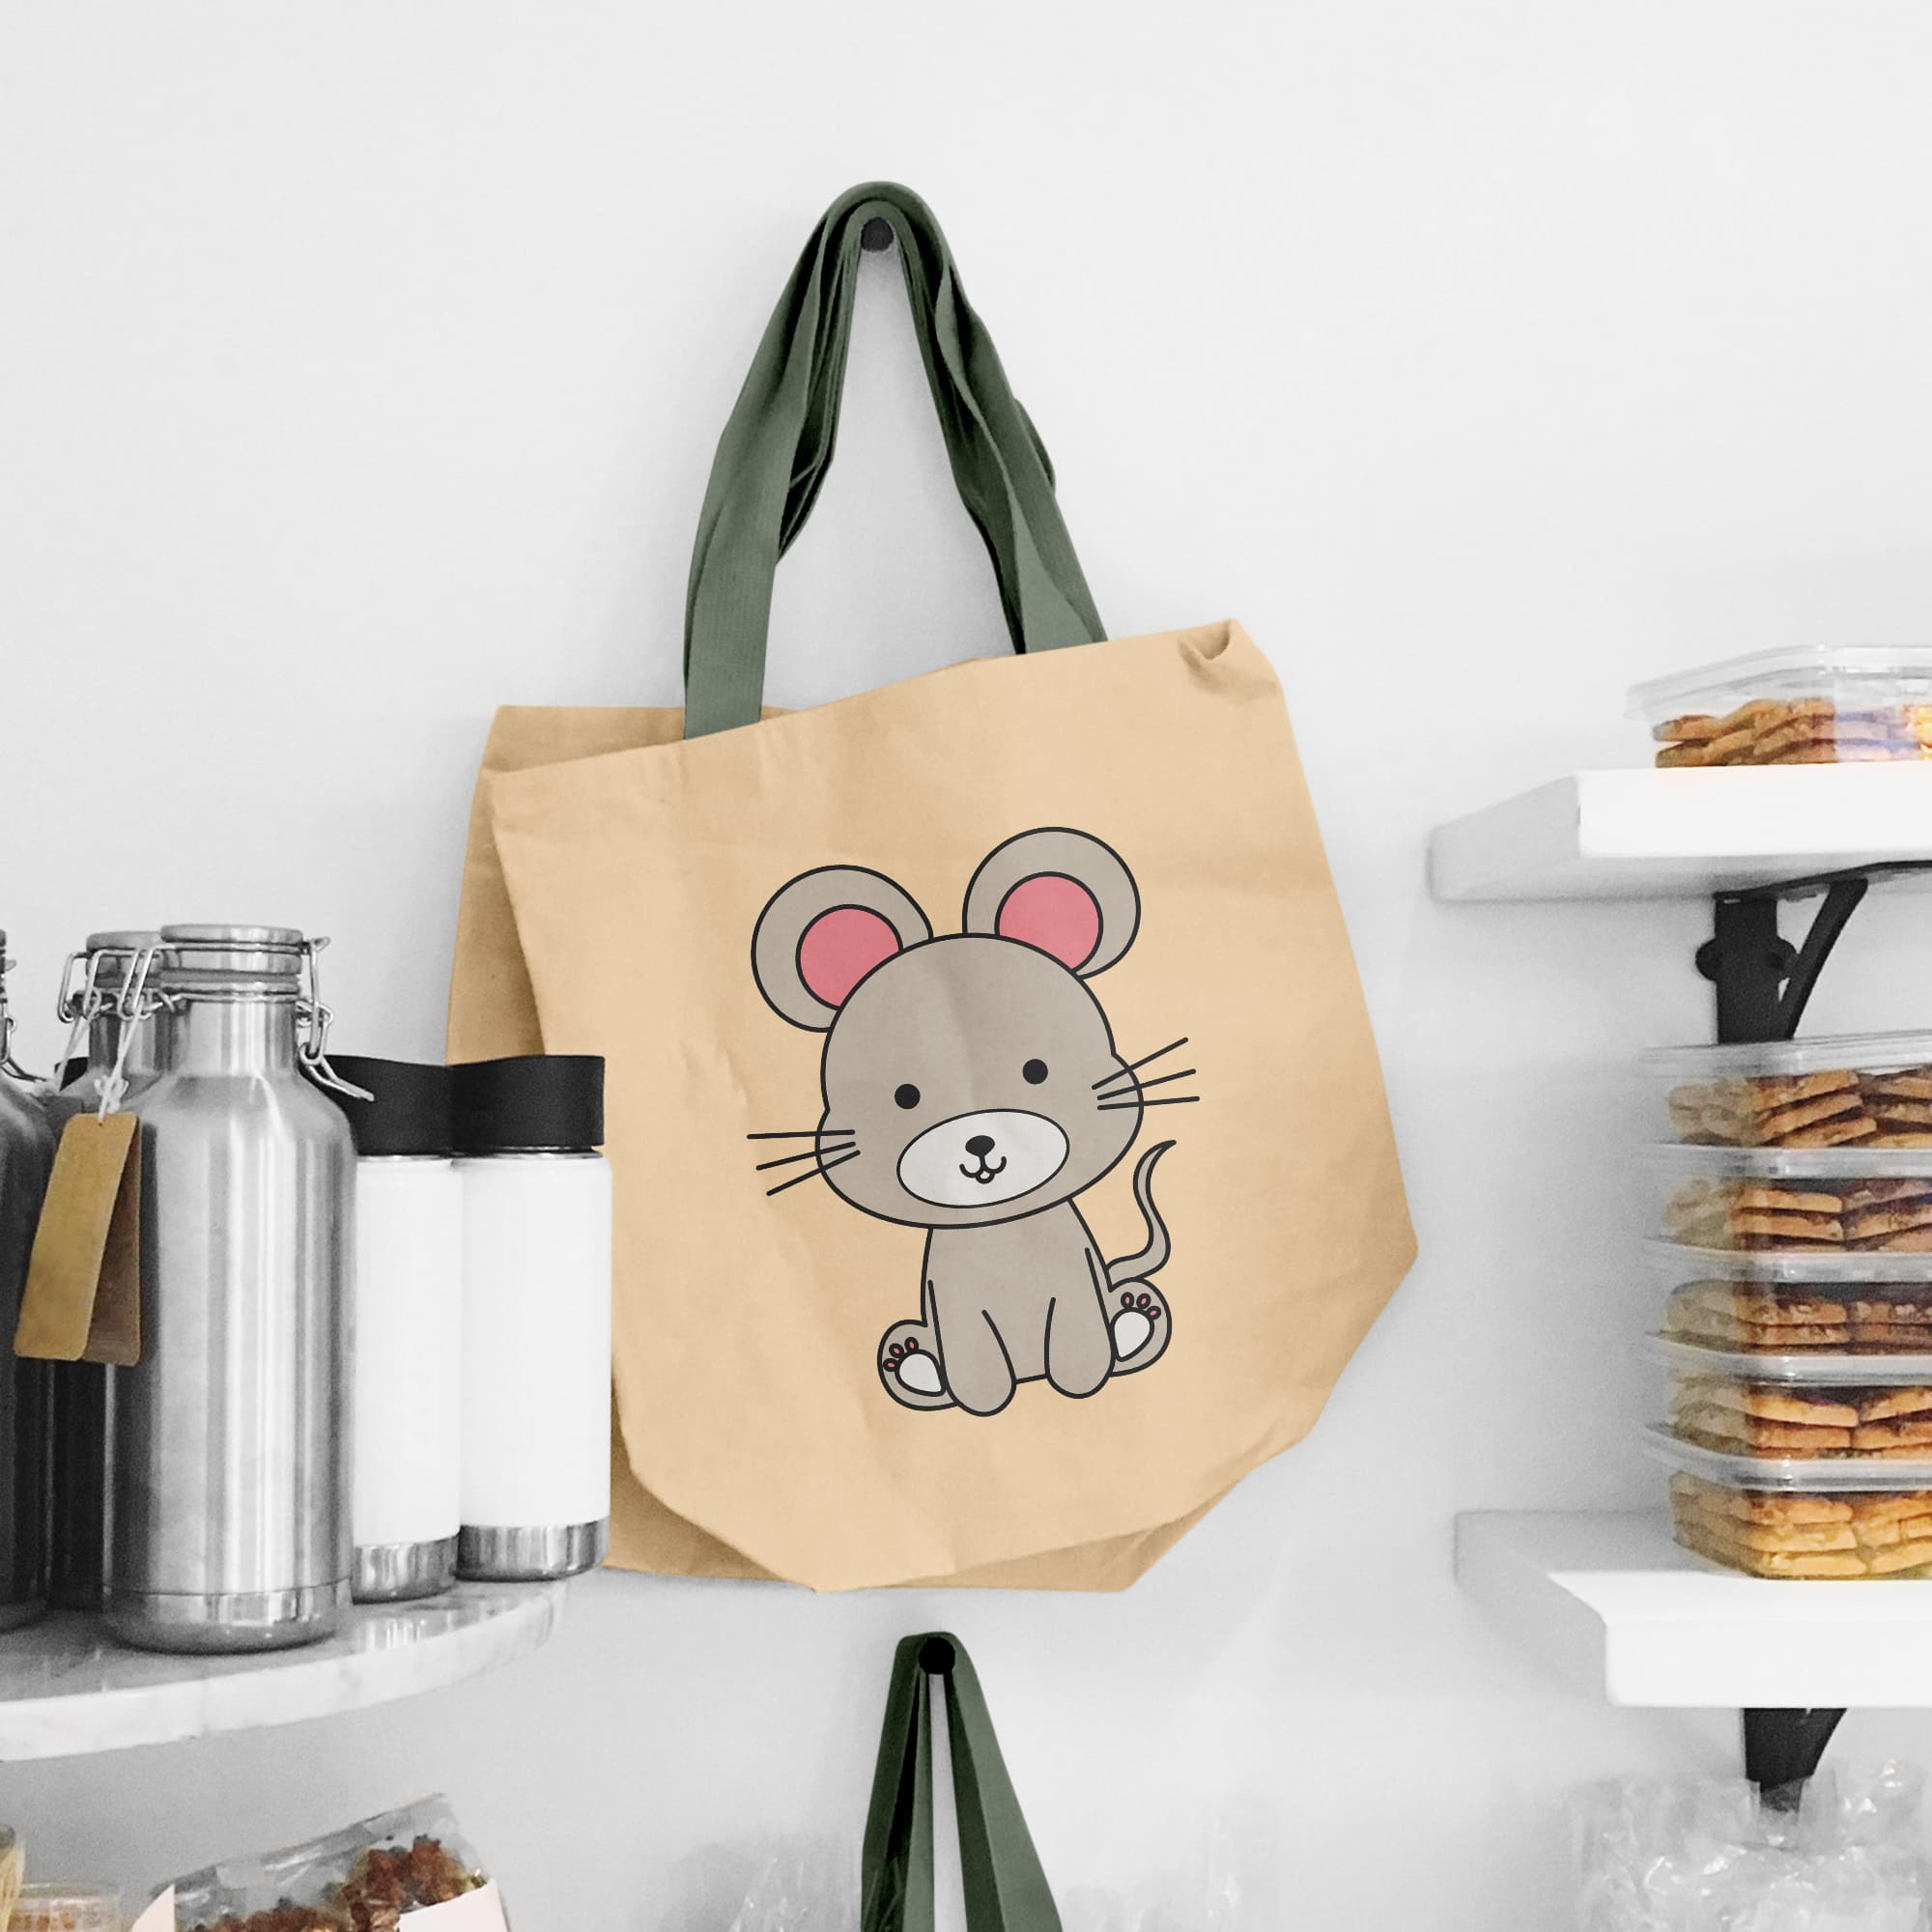 Brown bag with a mouse on it.